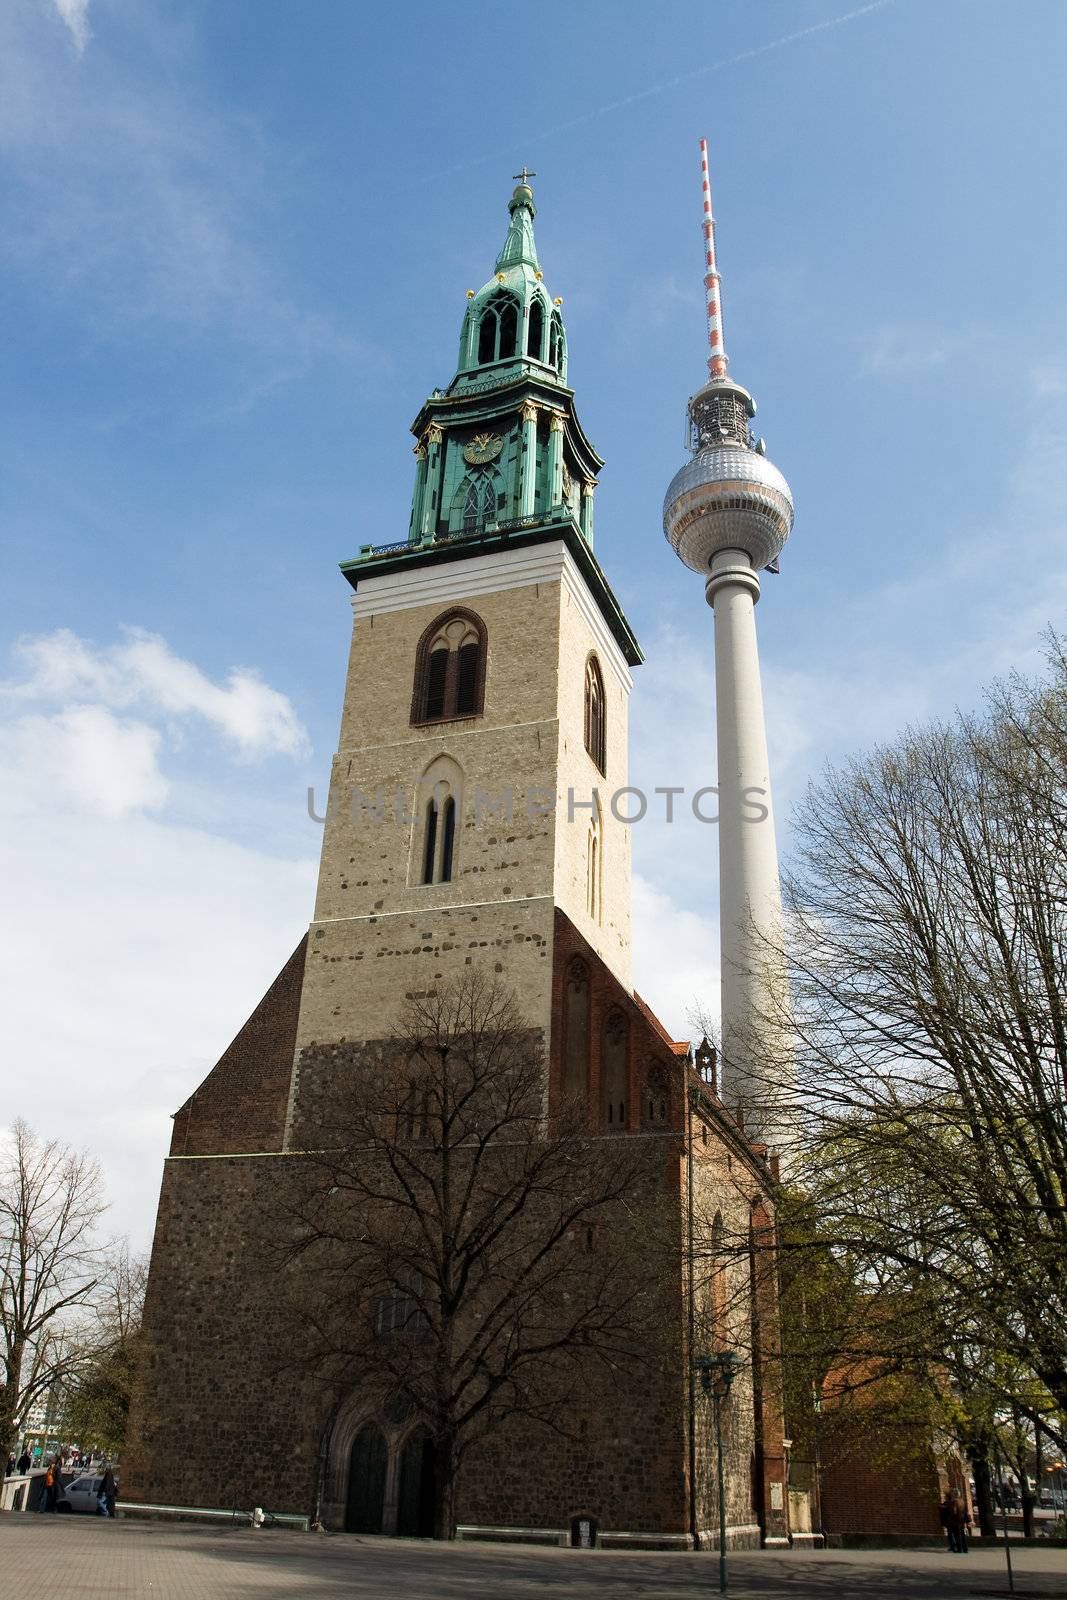 Berlin TV tower or Fernsehturm and St. Mary's Church in Alexanderplatz. The Fernsehturm is the fourth tallest freestanding structure in Europe.